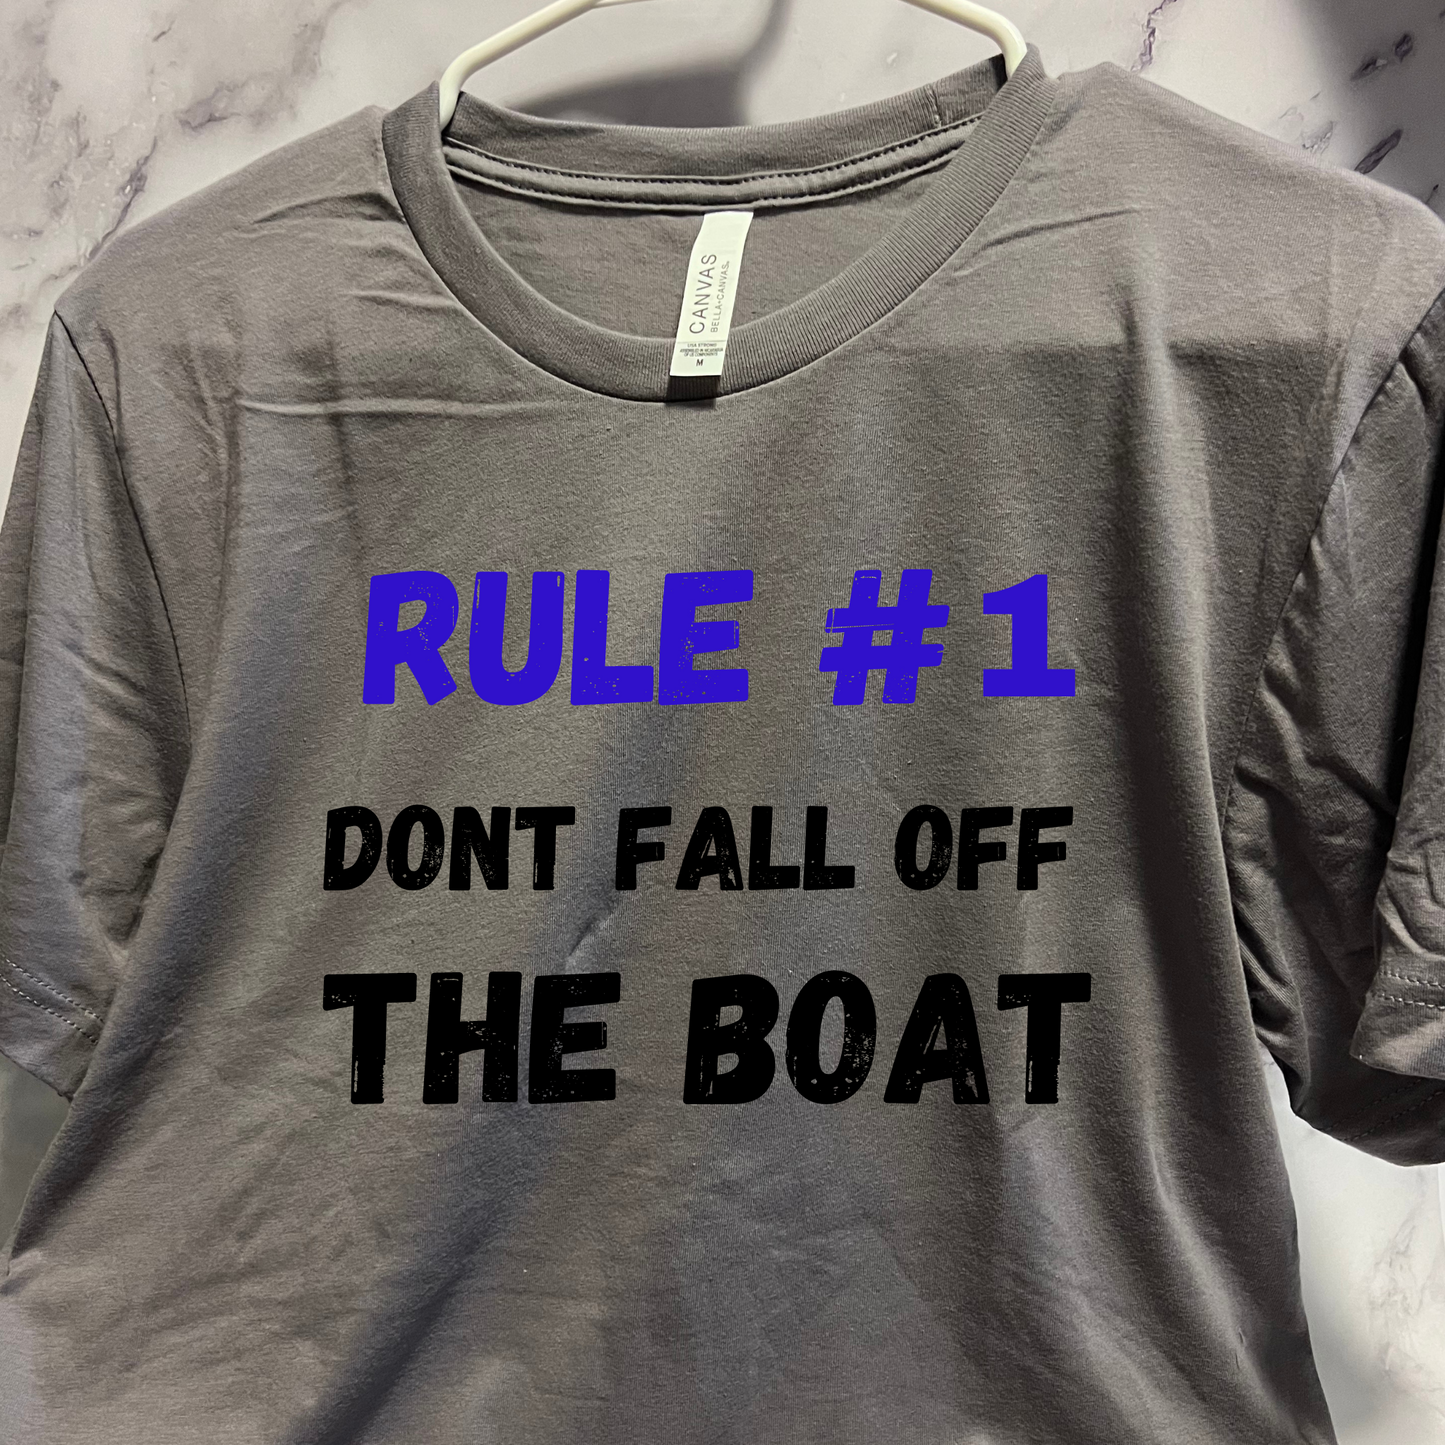 Rule #1 don't fall off the boat, Funny boat shirt, short sleeve unisex t-shirt, for men or women